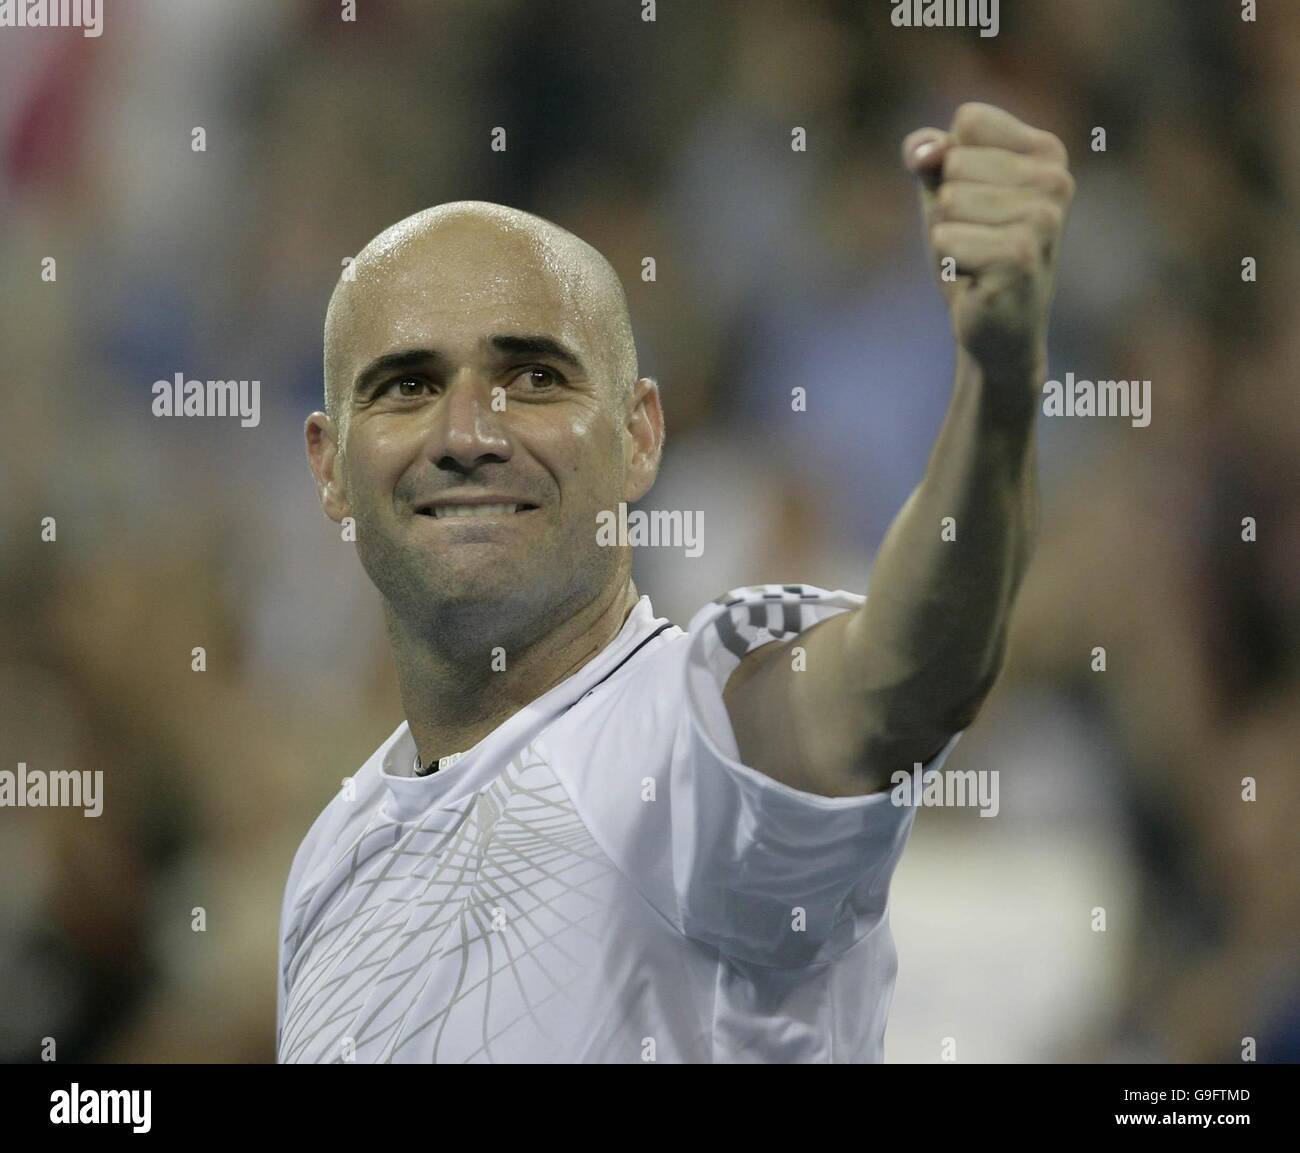 An emotional Andre Agassi celebrates after winning his first round match against Andrei Pavel during the US Open at Flushing Meadow, New York. After the tournament he is to retire from tennis. Stock Photo